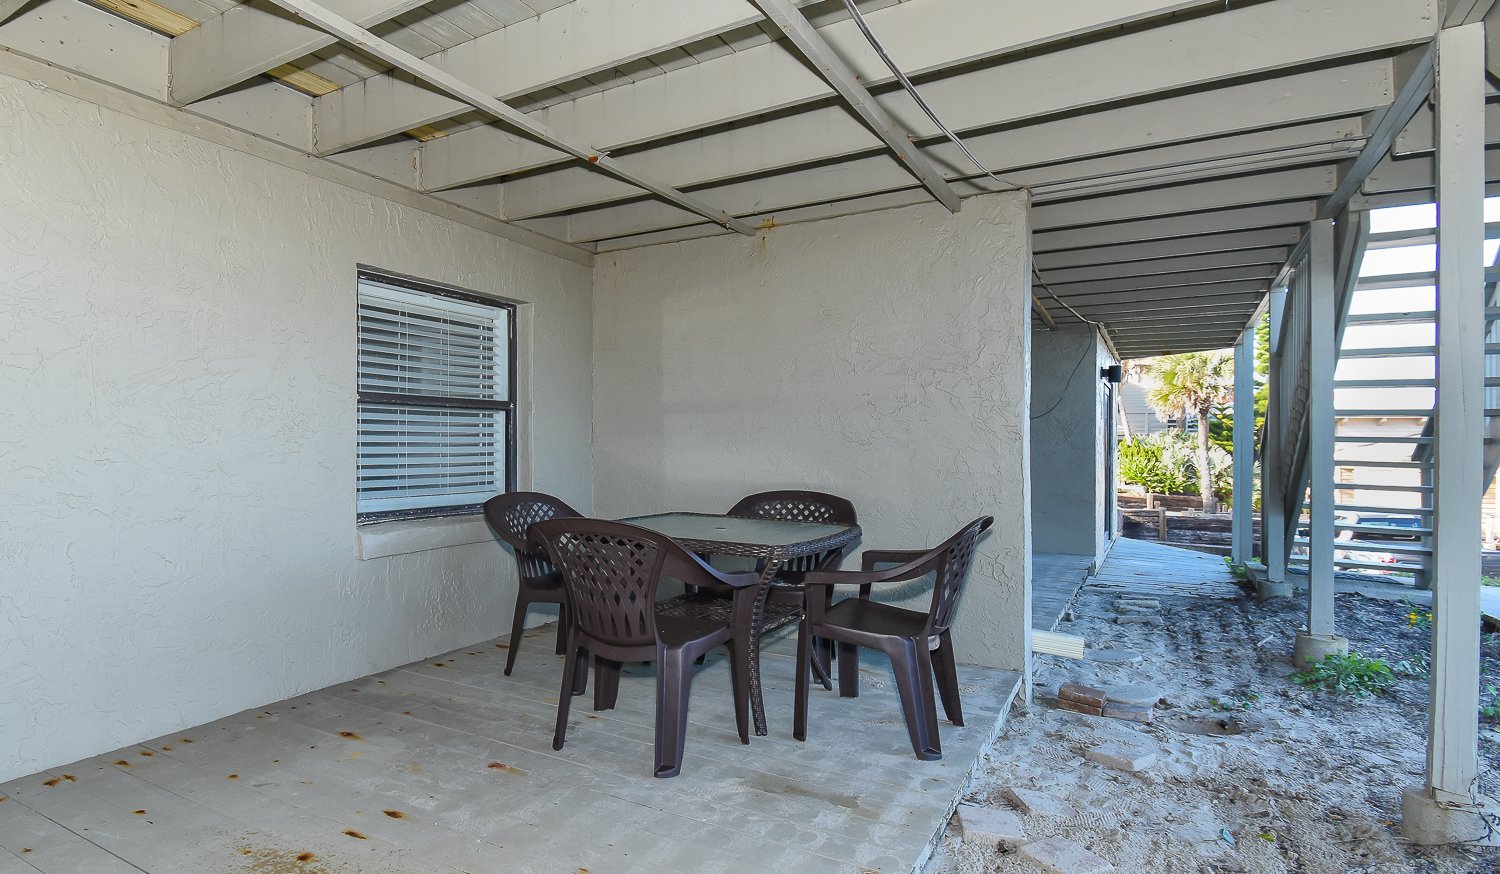 Covered patio with dining table and chairs